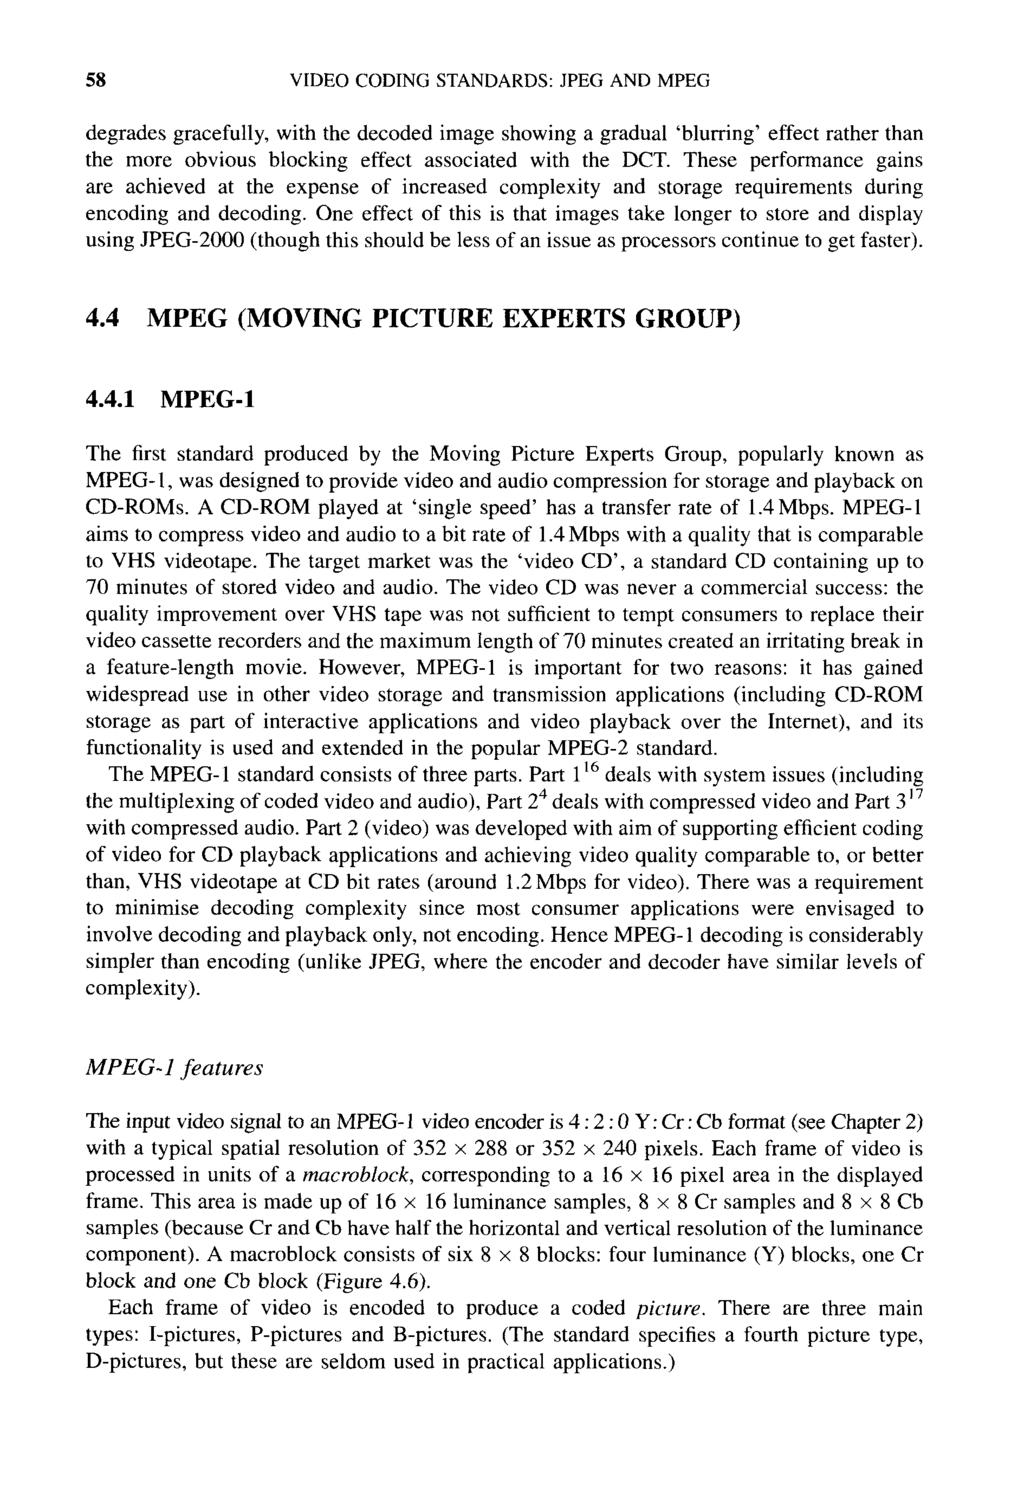 58 VIDEO CODING STANDARDS: MPEG JPEG degrades gracefully, with the decoded image showing a gradual blurring effect rather than the more obvious blocking effect associated with the DCT.